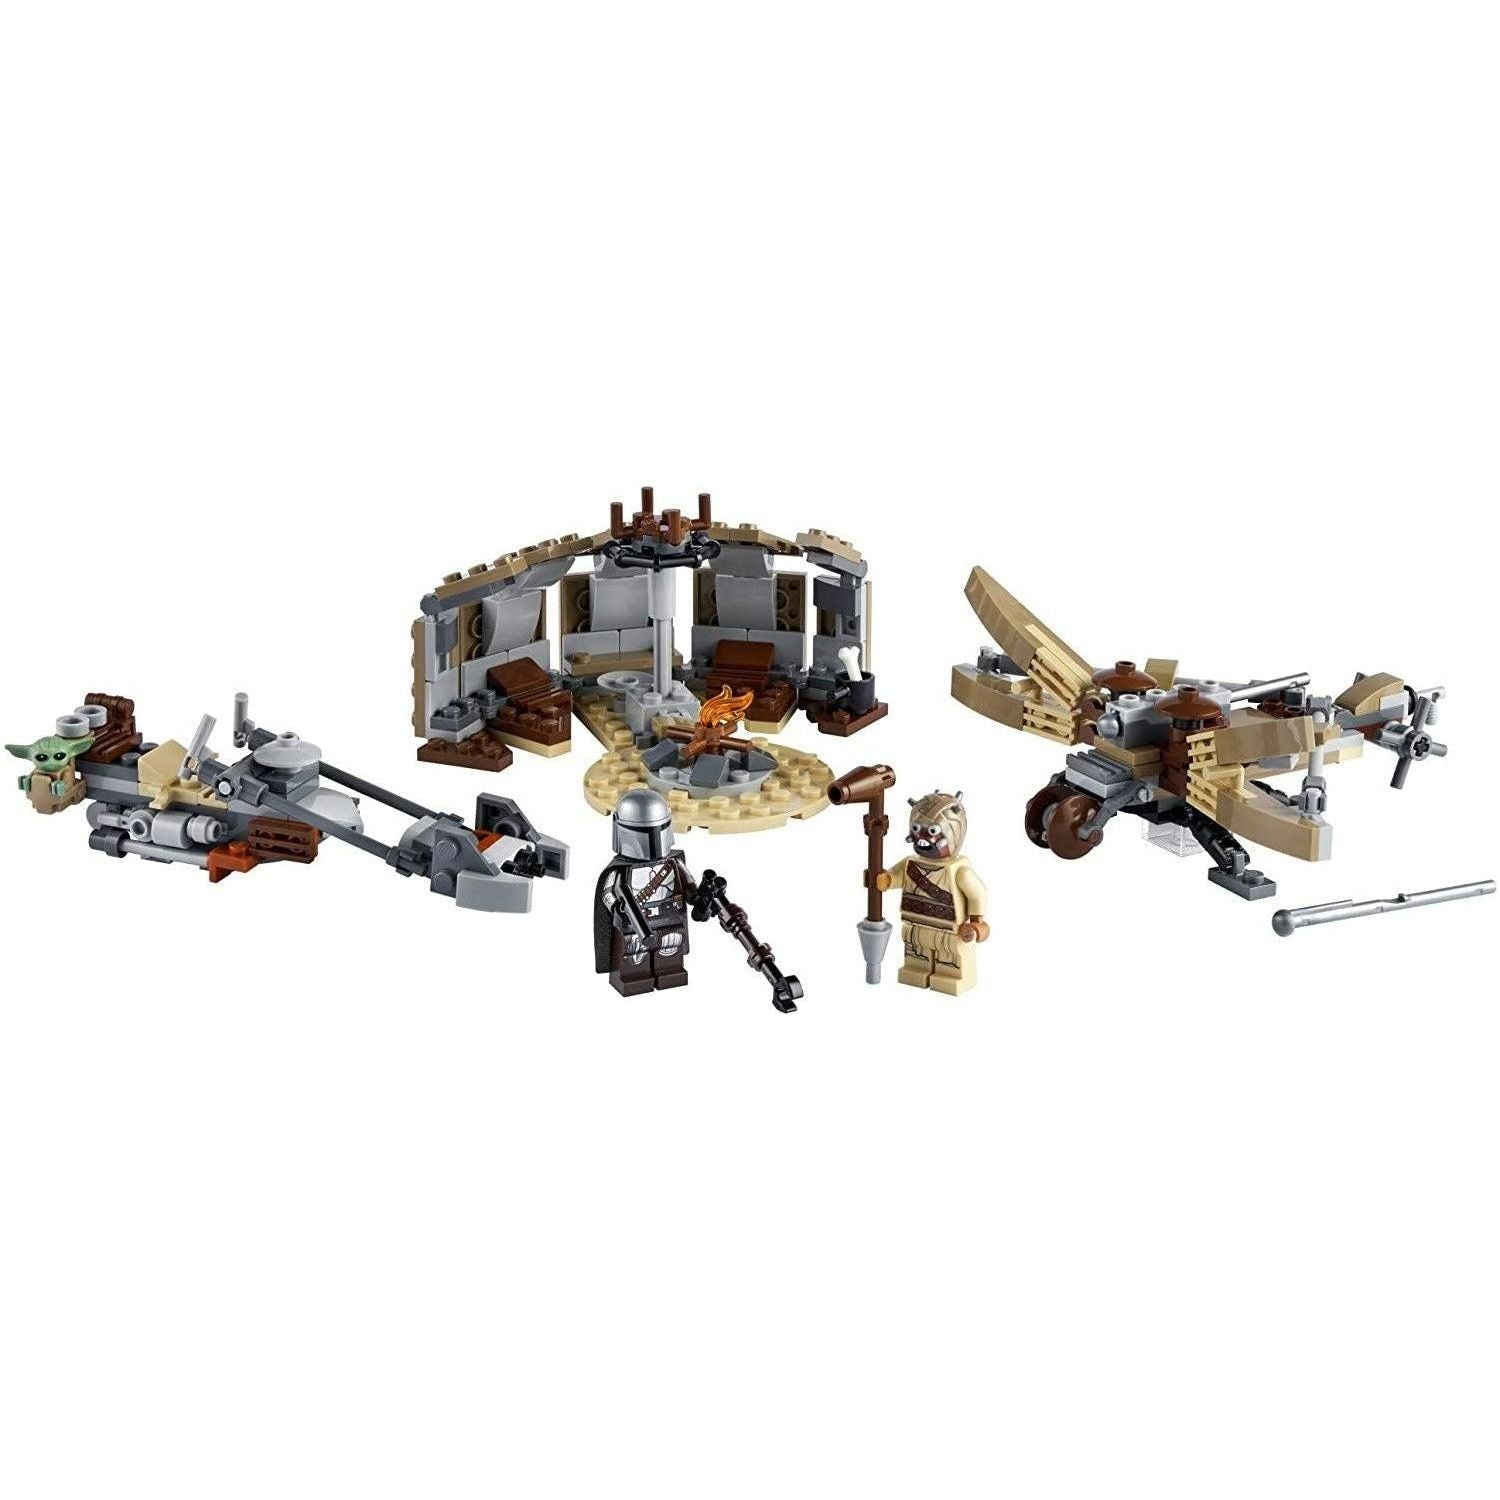 LEGO Star Wars: The Mandalorian Trouble on Tatooine 75299 (277 Pieces) - BumbleToys - 5-7 Years, Boys, LEGO, OXE, Pre-Order, star wars